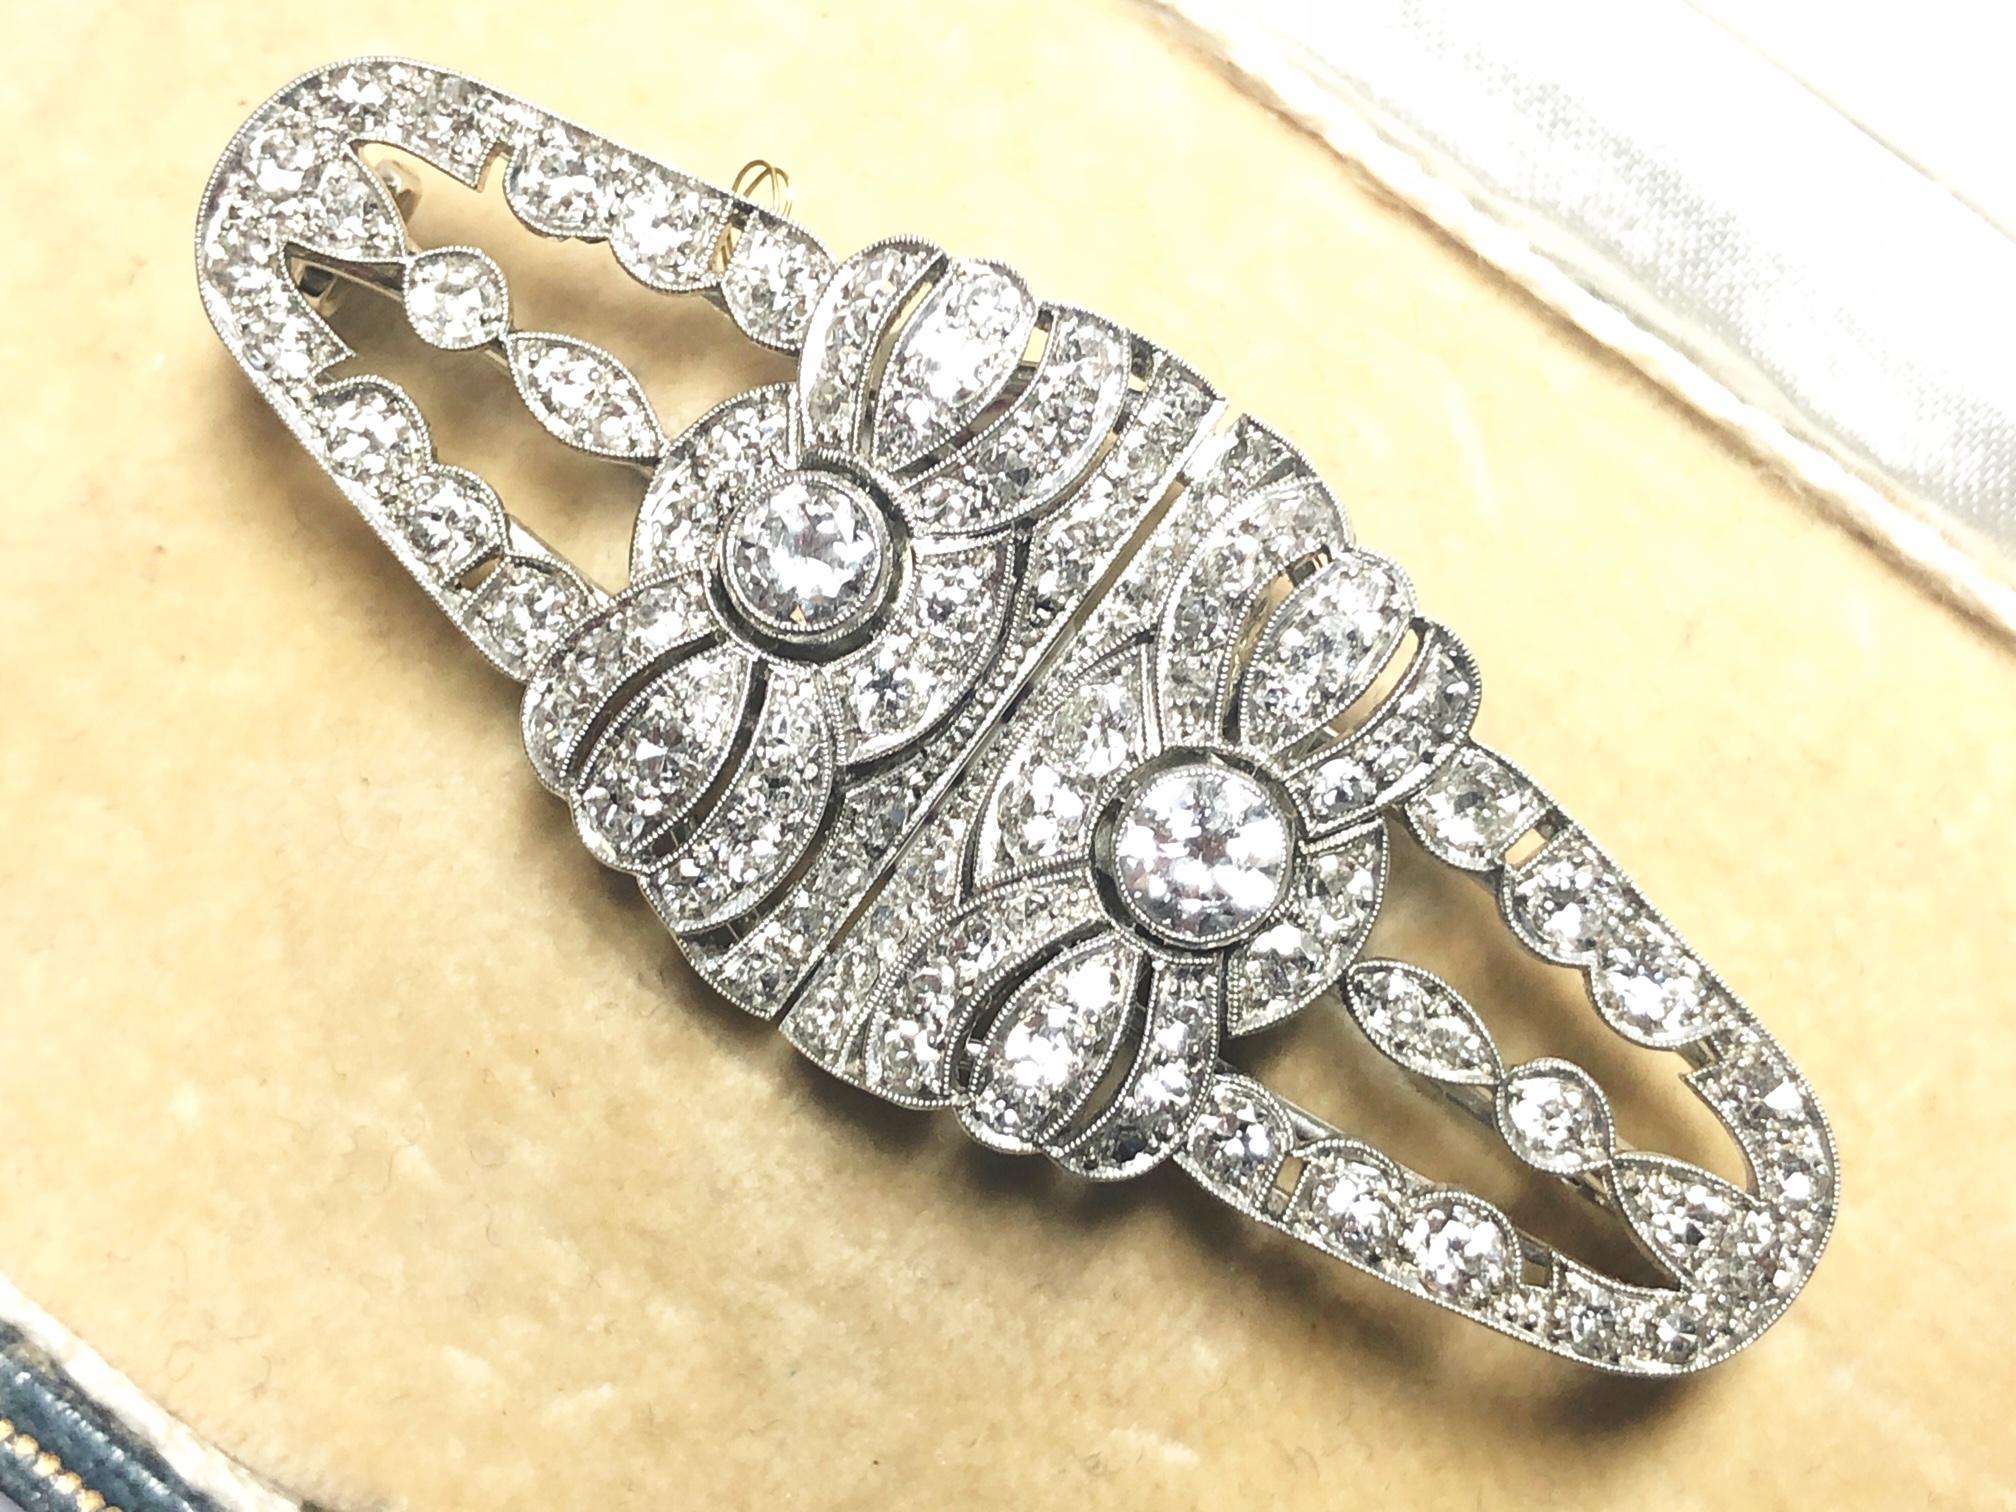 An Art deco double clip brooch, set with eight-cut, Swiss-cut, round brilliant-cut and Edwardian-cut diamonds, with an estimated total diamond weight of 2.15ct, mounted in platinum, with 14ct white gold clips and frame, with Austrian marks, horse